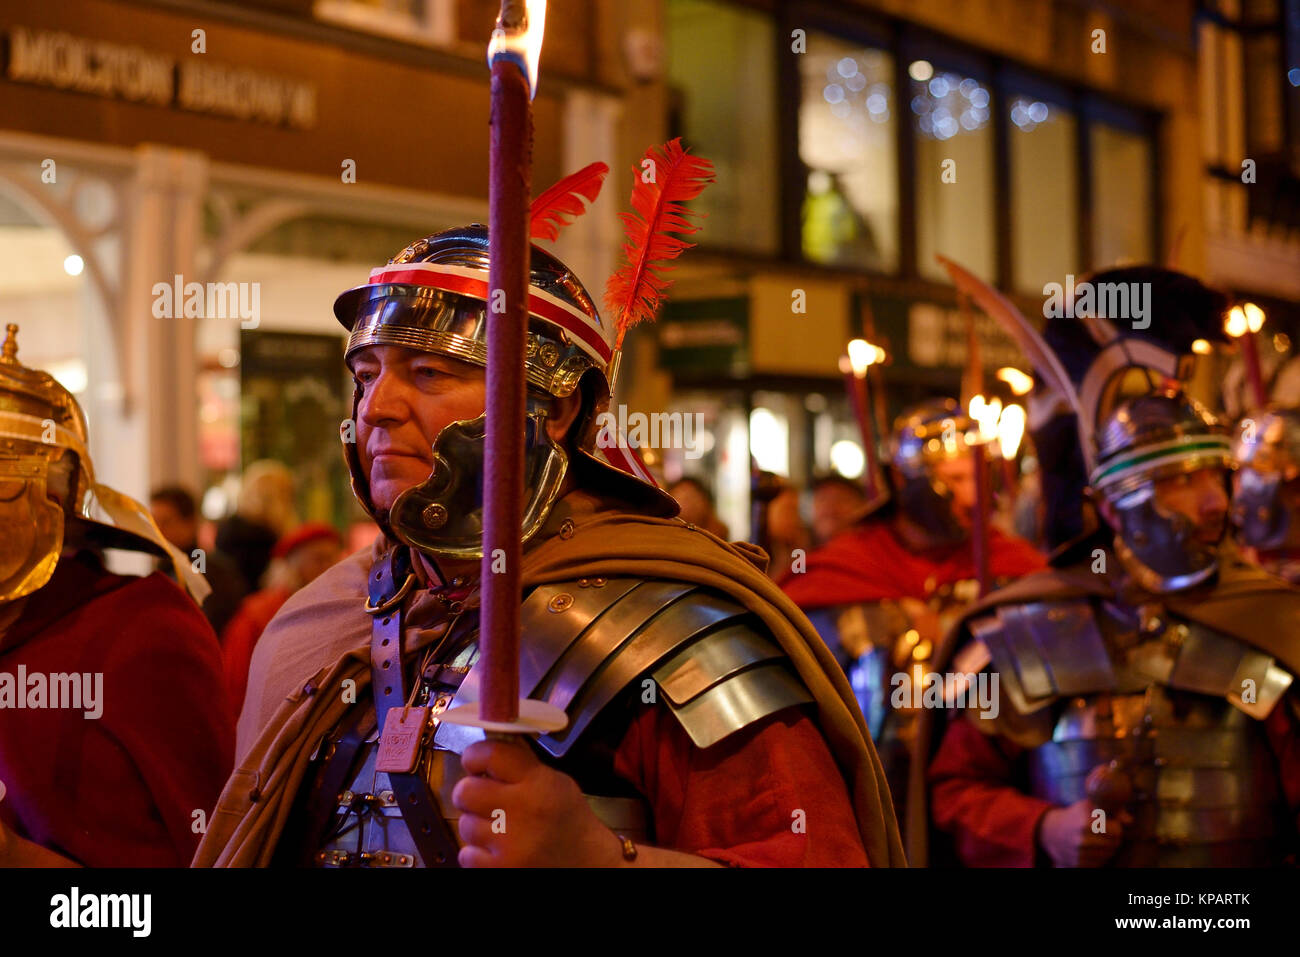 Chester, UK. 14th December 2017. A performer in Roman costume takes part in the annual Winter Watch parade through the city centre. The parade involves musicians, street theatre and costume performances with characters including angels, devils, skeletons and dragons. Credit: Andrew Paterson/Alamy Live News Stock Photo